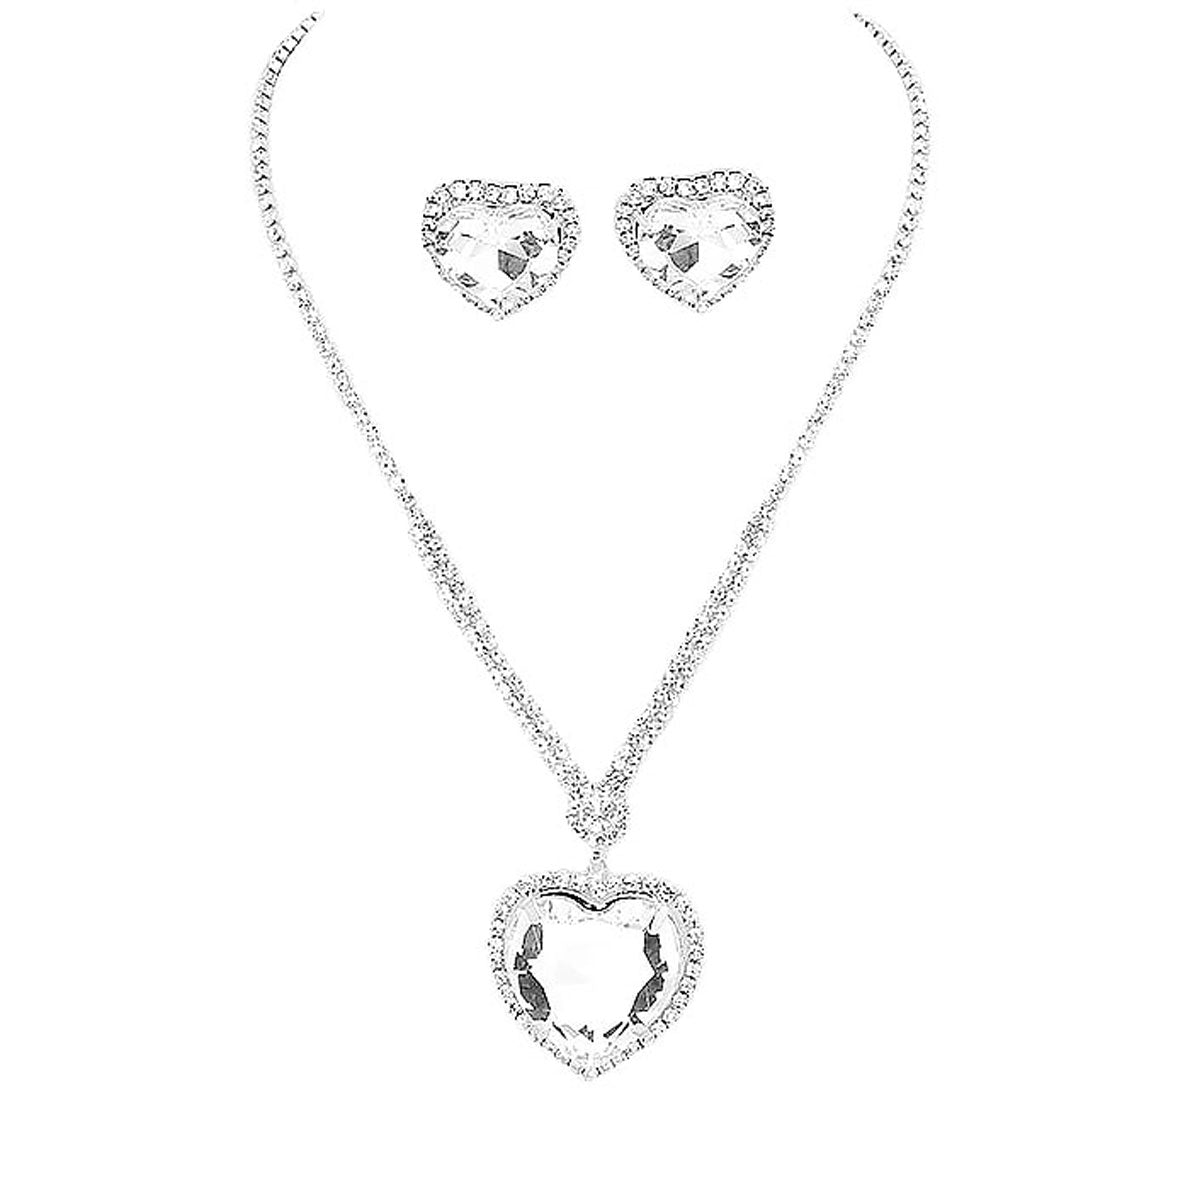 Silver Rhinestone Pave Crystal Heart Pendant Necklace, Get ready with these Pendant Necklace, put on a pop of color to complete your ensemble. Perfect for adding just the right amount of shimmer & shine and a touch of class to special events. Perfect Birthday Gift, Anniversary Gift, Mother's Day Gift, Graduation Gift.